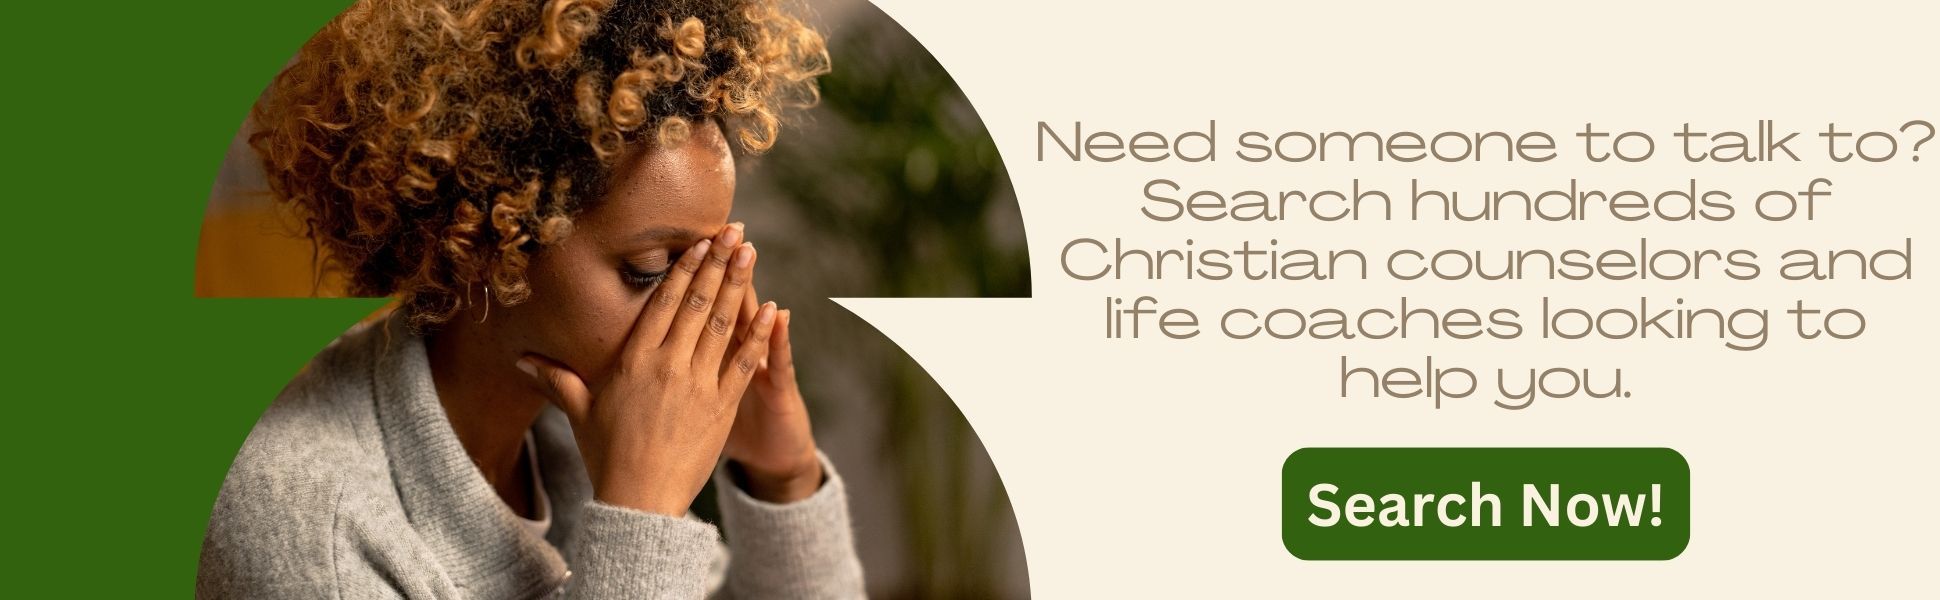 Ad to find a local Christian counselor and life coach 